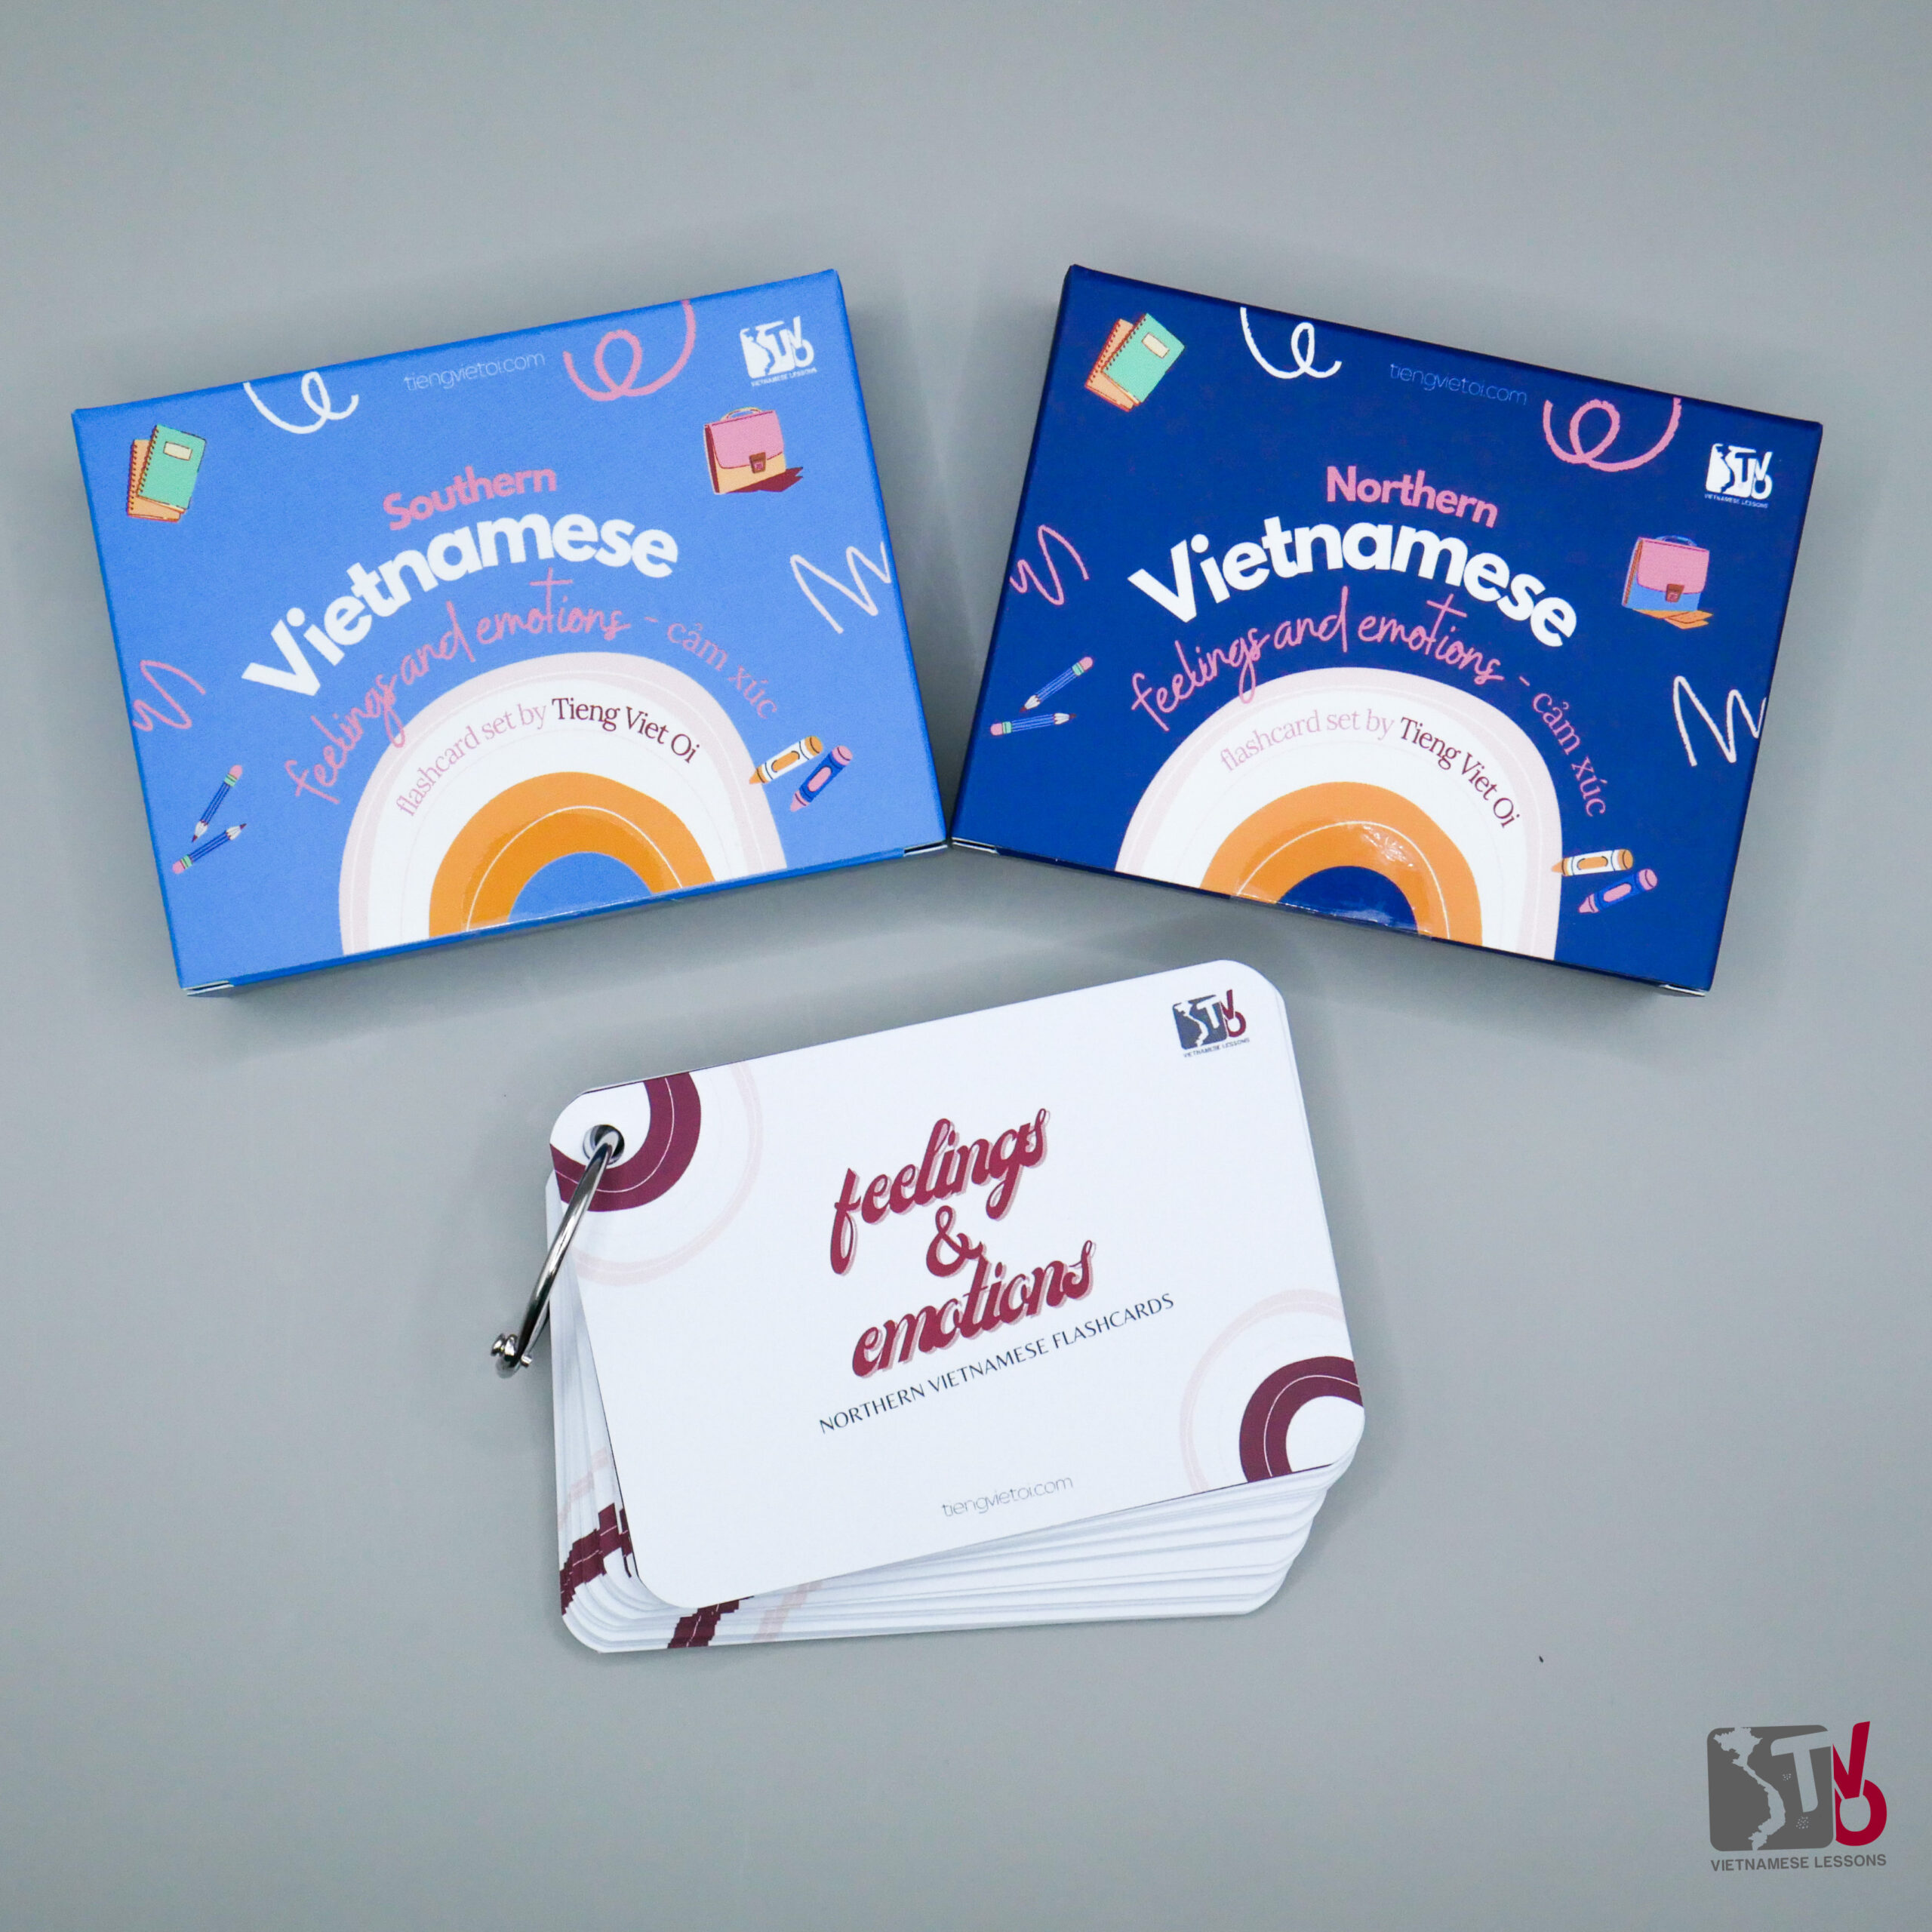 Feelings & Emotions Flashcards - Tieng Viet Oi